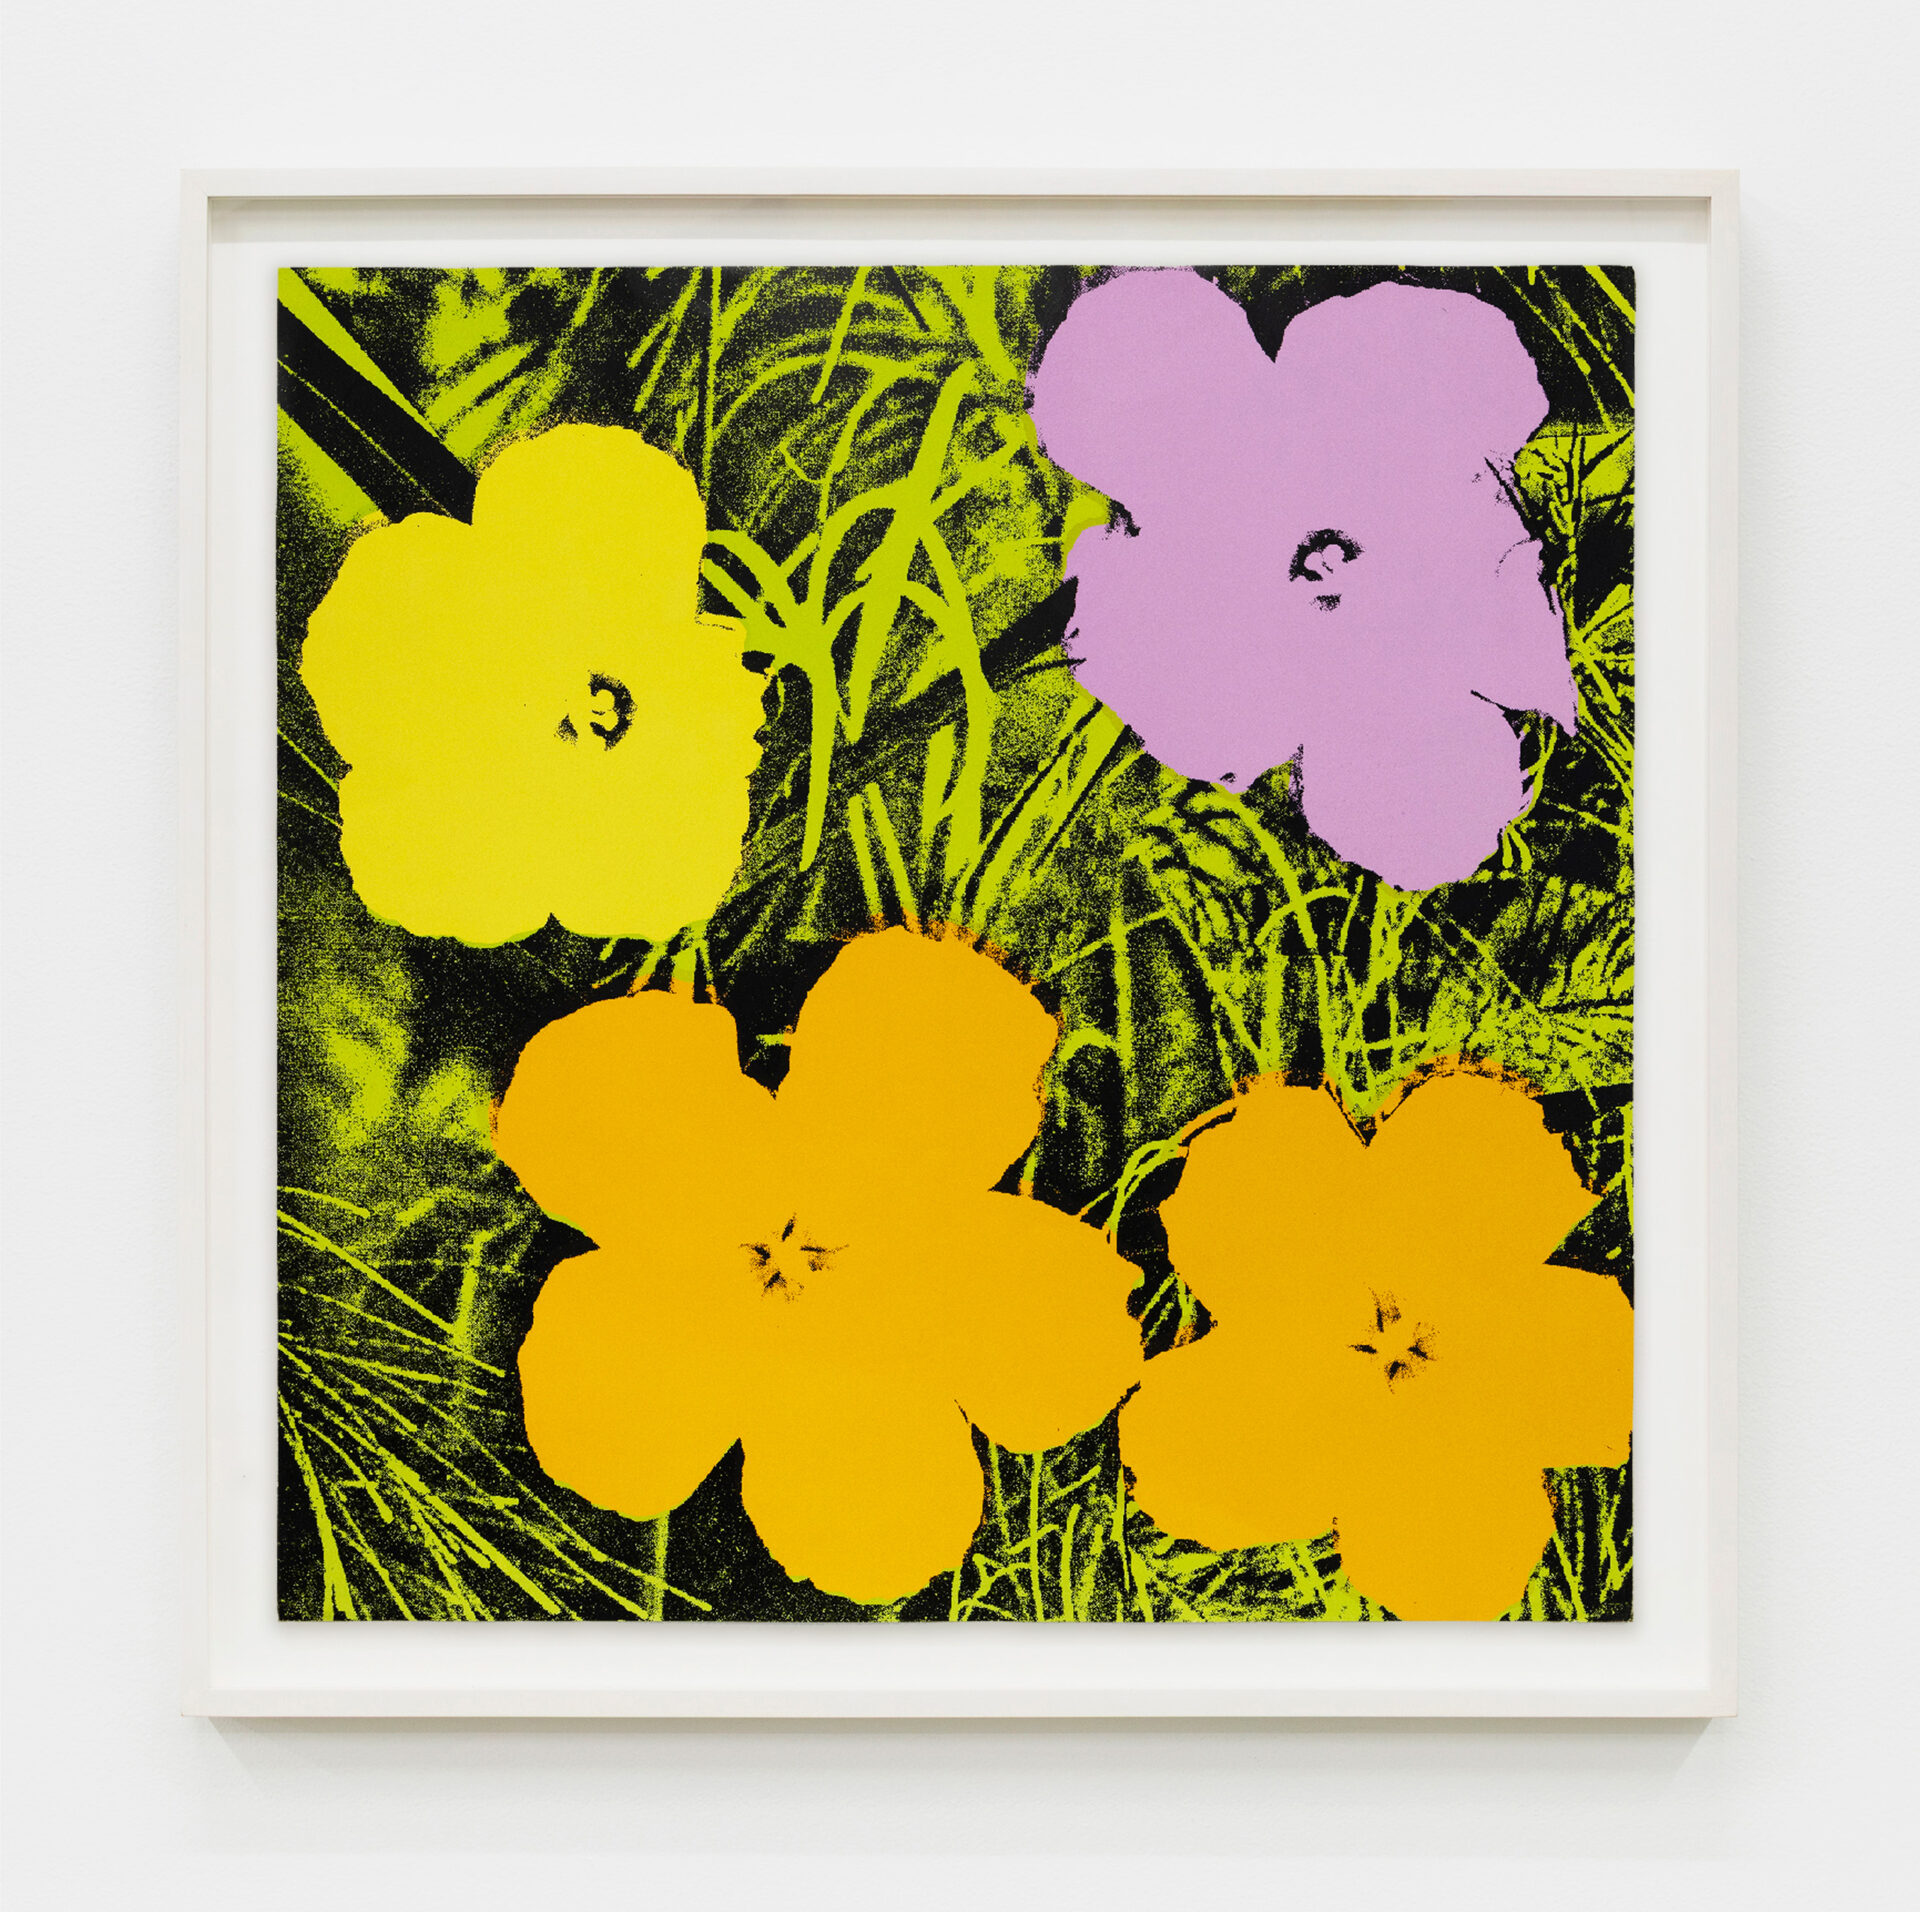 Andy Warhol Flowers (F. & S. II.67), 1970 Screenprint Paper Dimensions: 36 x 36 inches (91.4 x 91.4 cm) Framed Dimensions: 39 1/8 x 39 1/8 inches (99.4 x 99.4 cm) Edition of 250